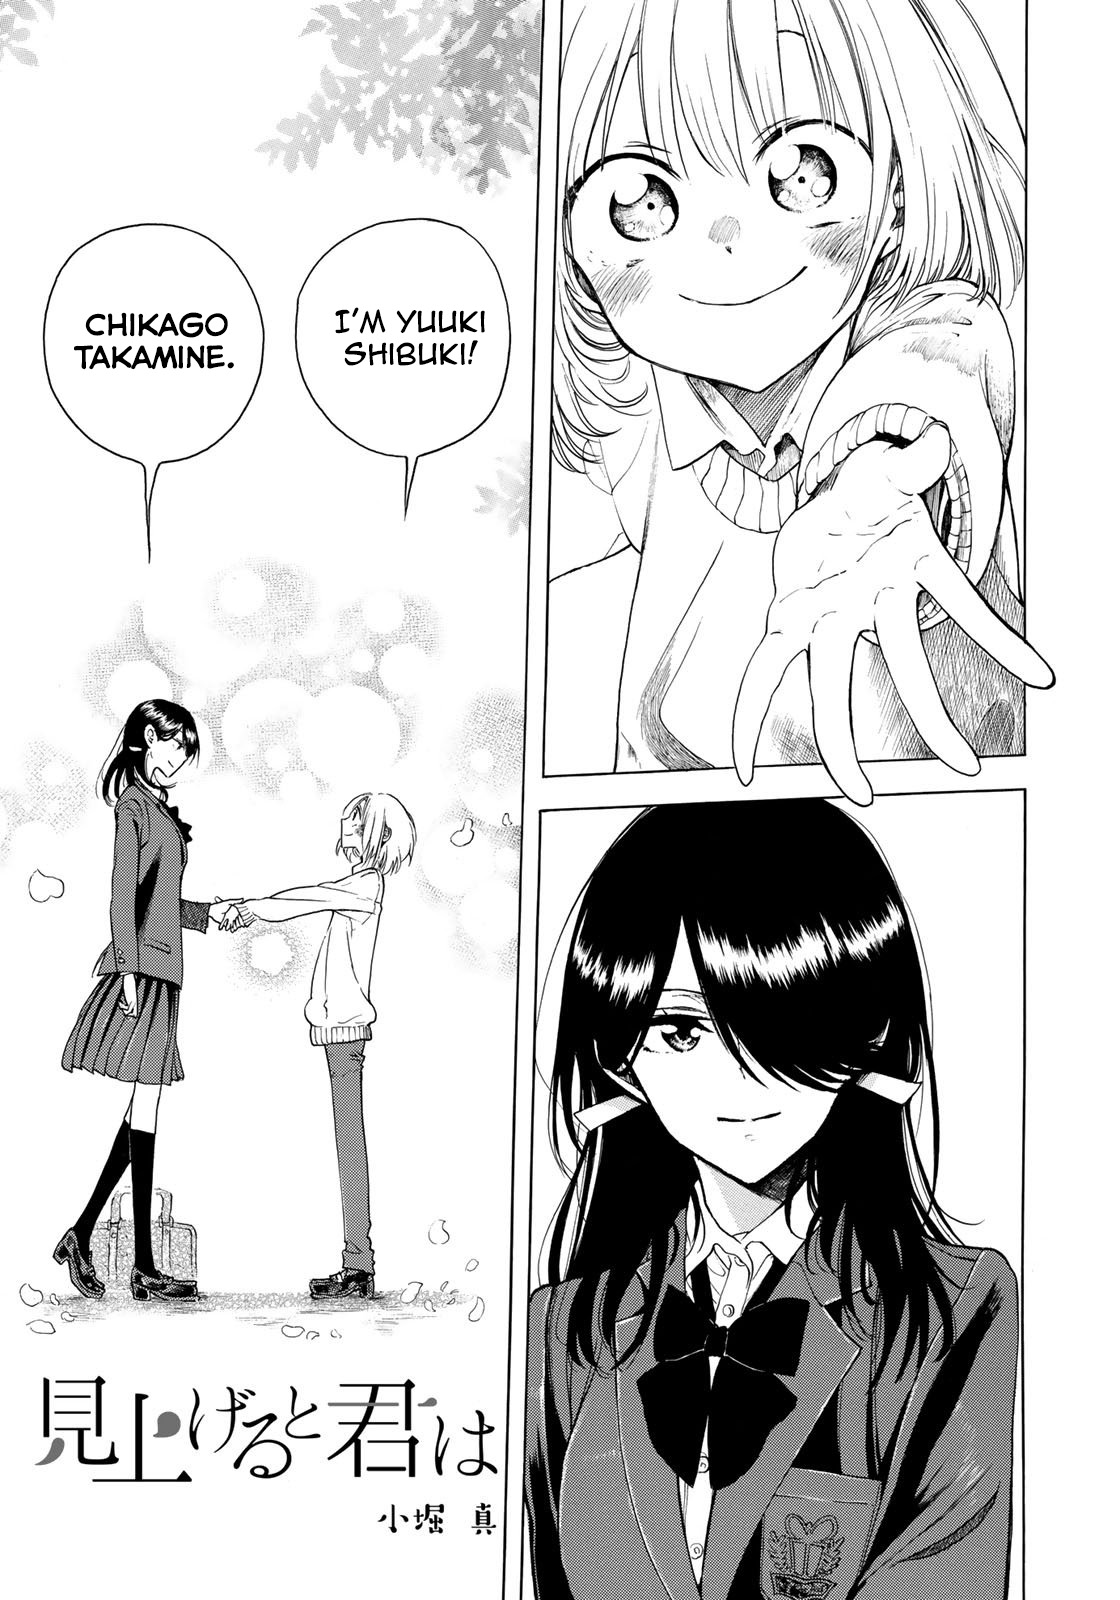 Looking Up to You Vol. 1 Ch. 3 A yearning